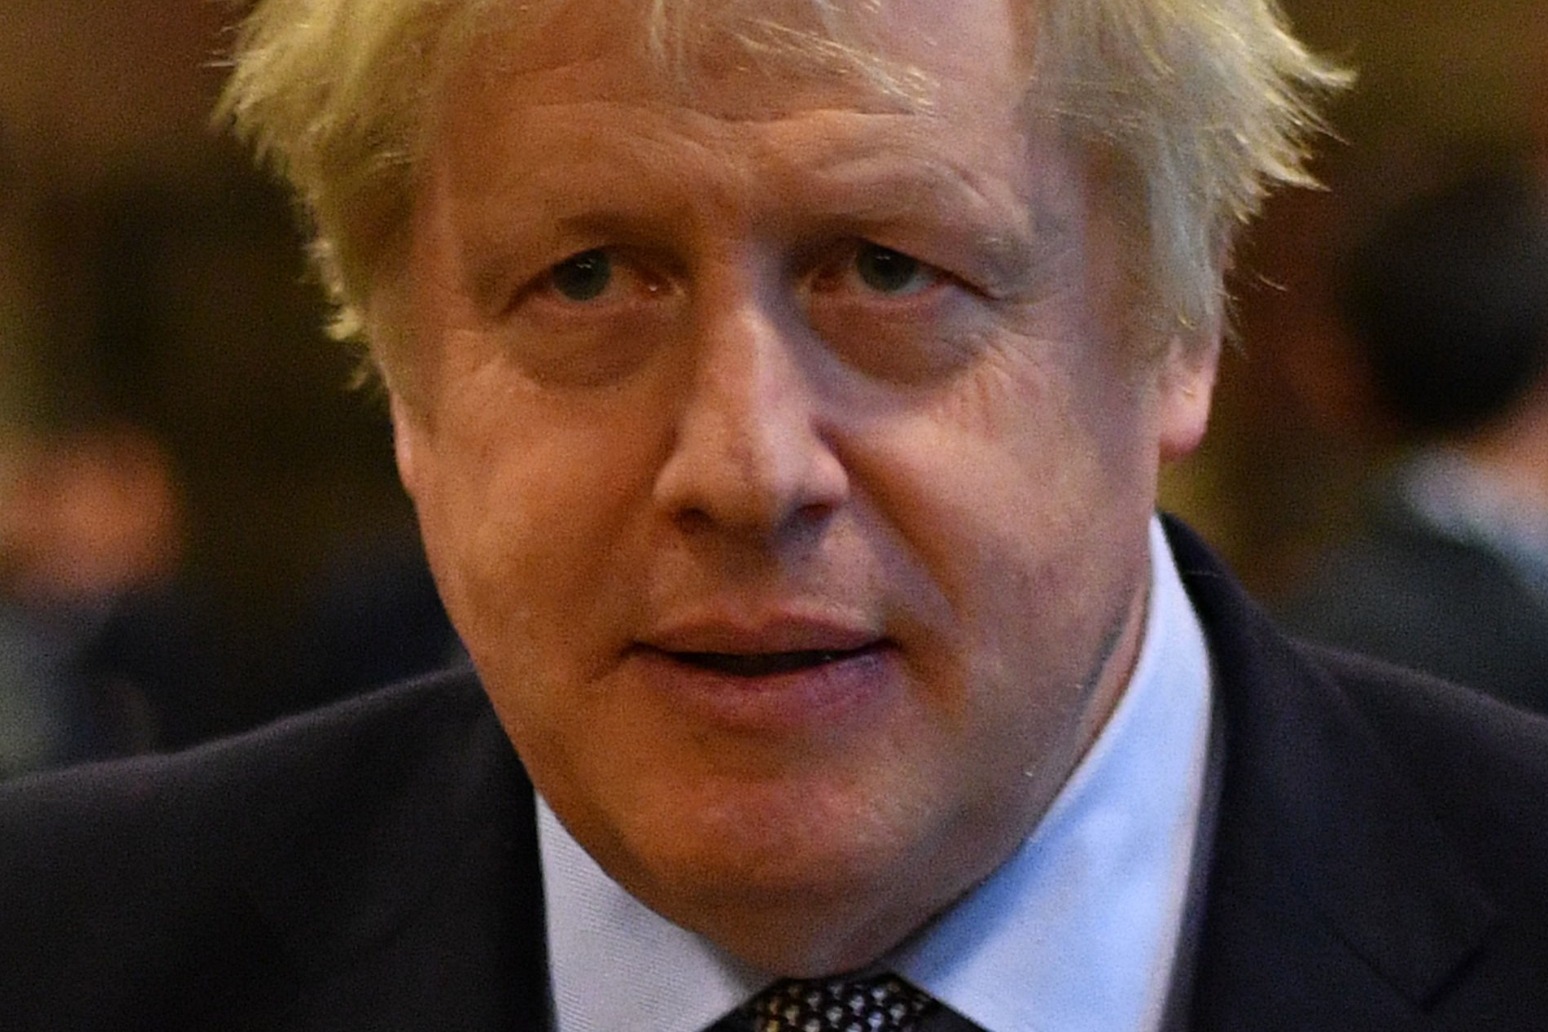 Boris Johnson says doctors prepared to announce his death as he battled Covid-19 